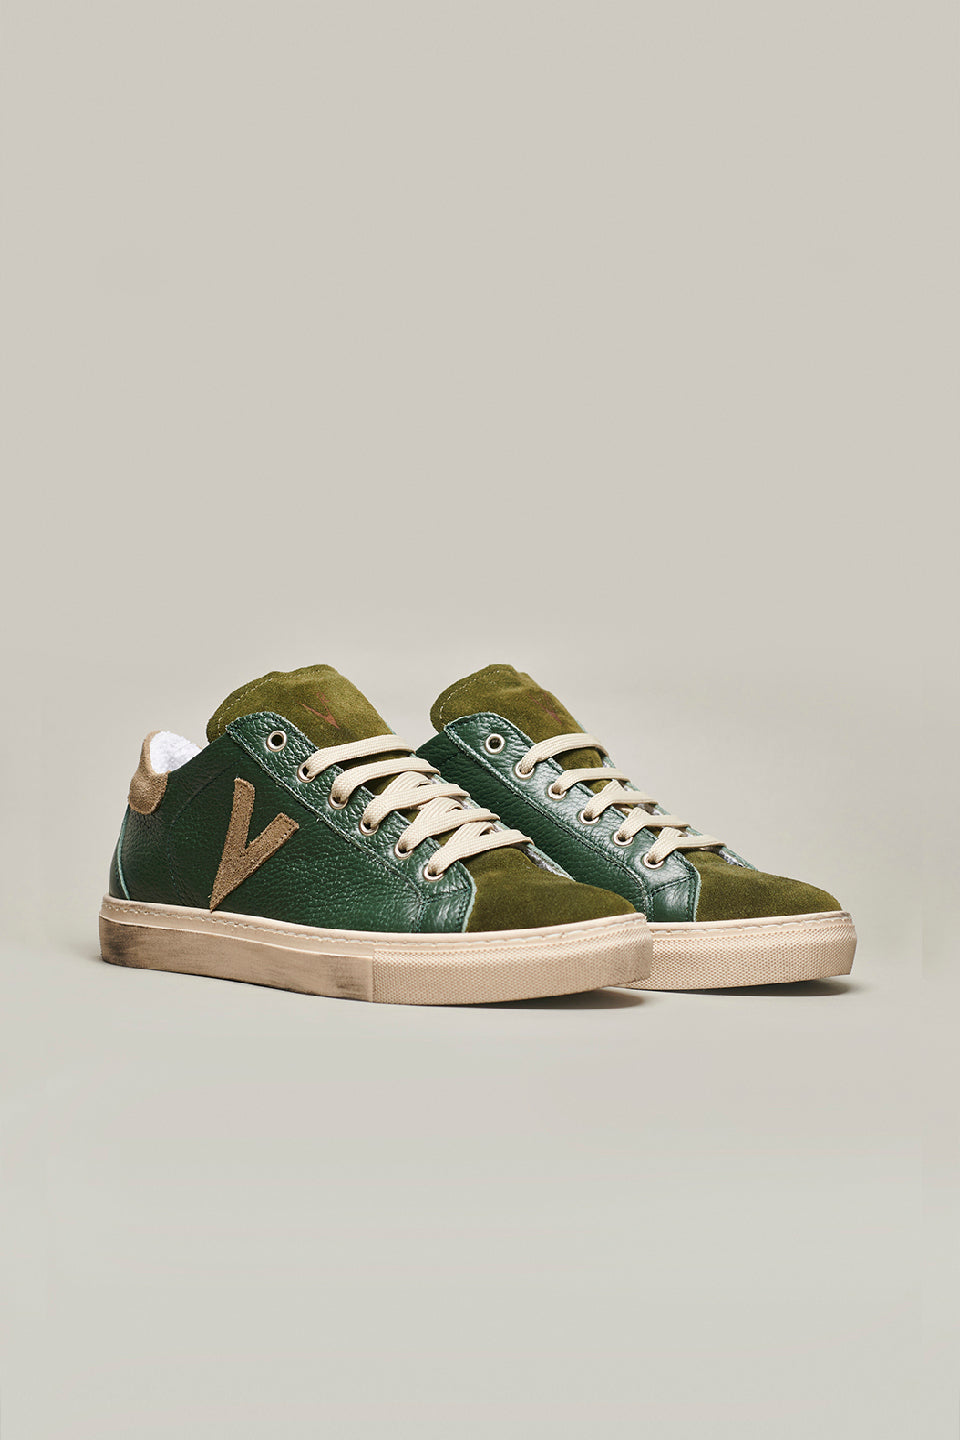 OLYMPIC - Green hammered leather low sole sneakers with Moro back and insert